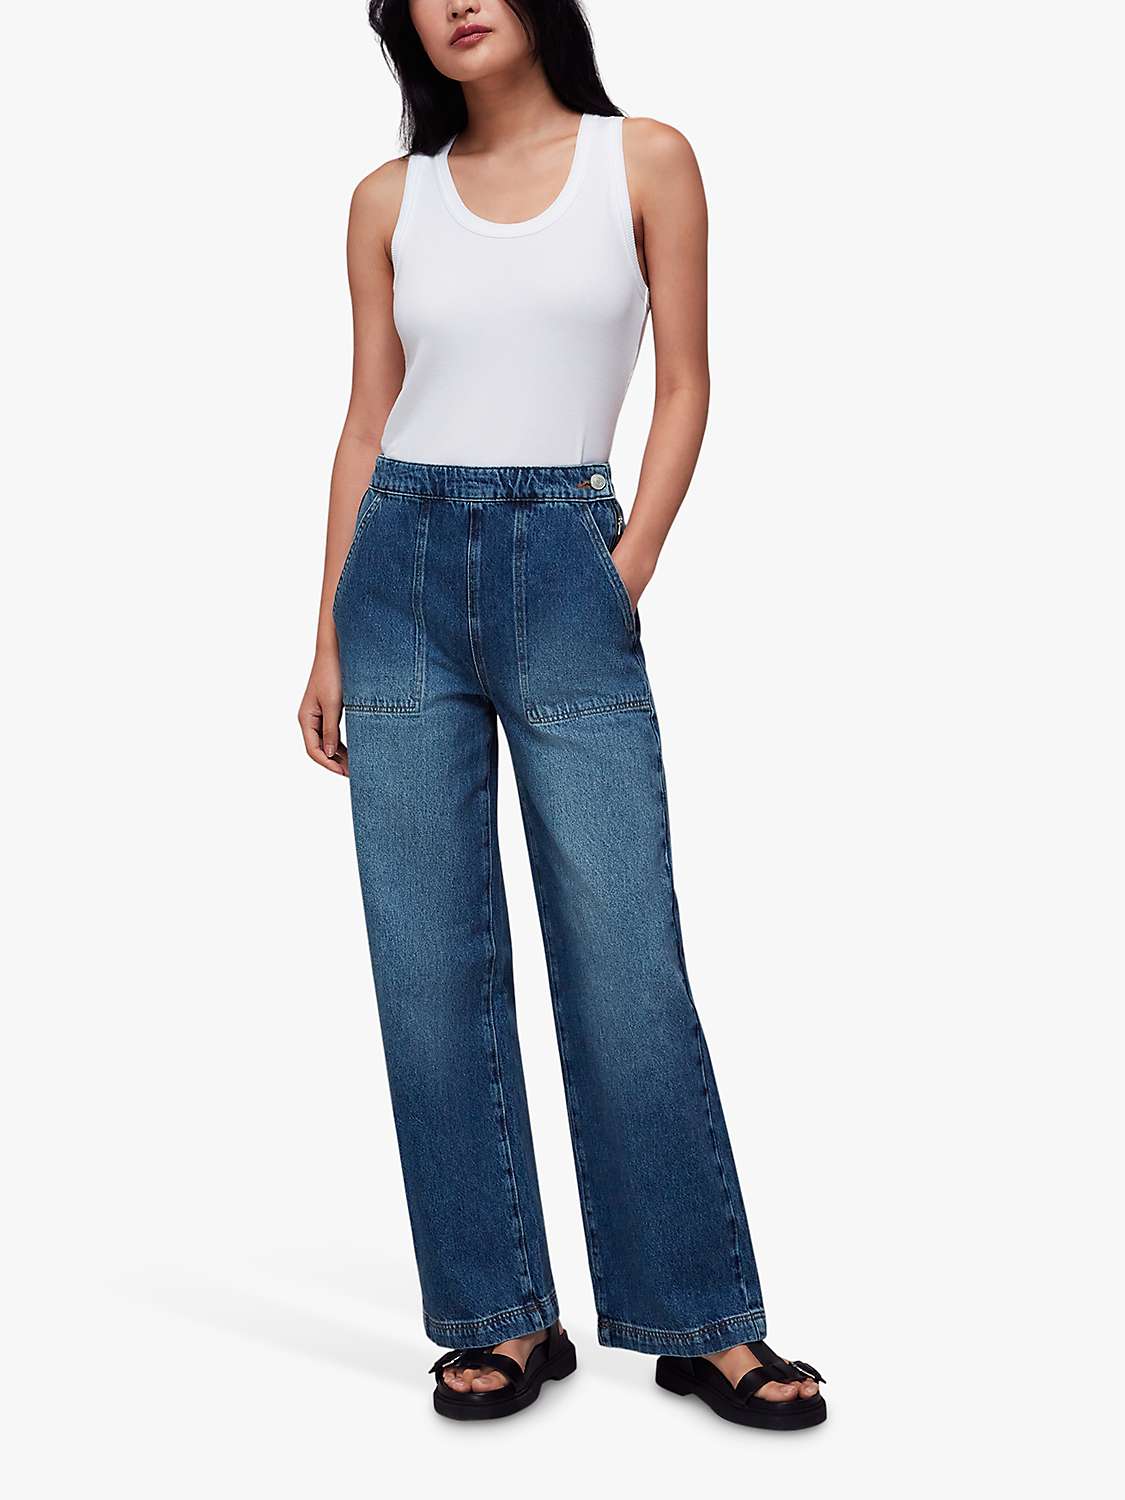 Whistles Authentic Side Zip Jeans, Denim at John Lewis & Partners